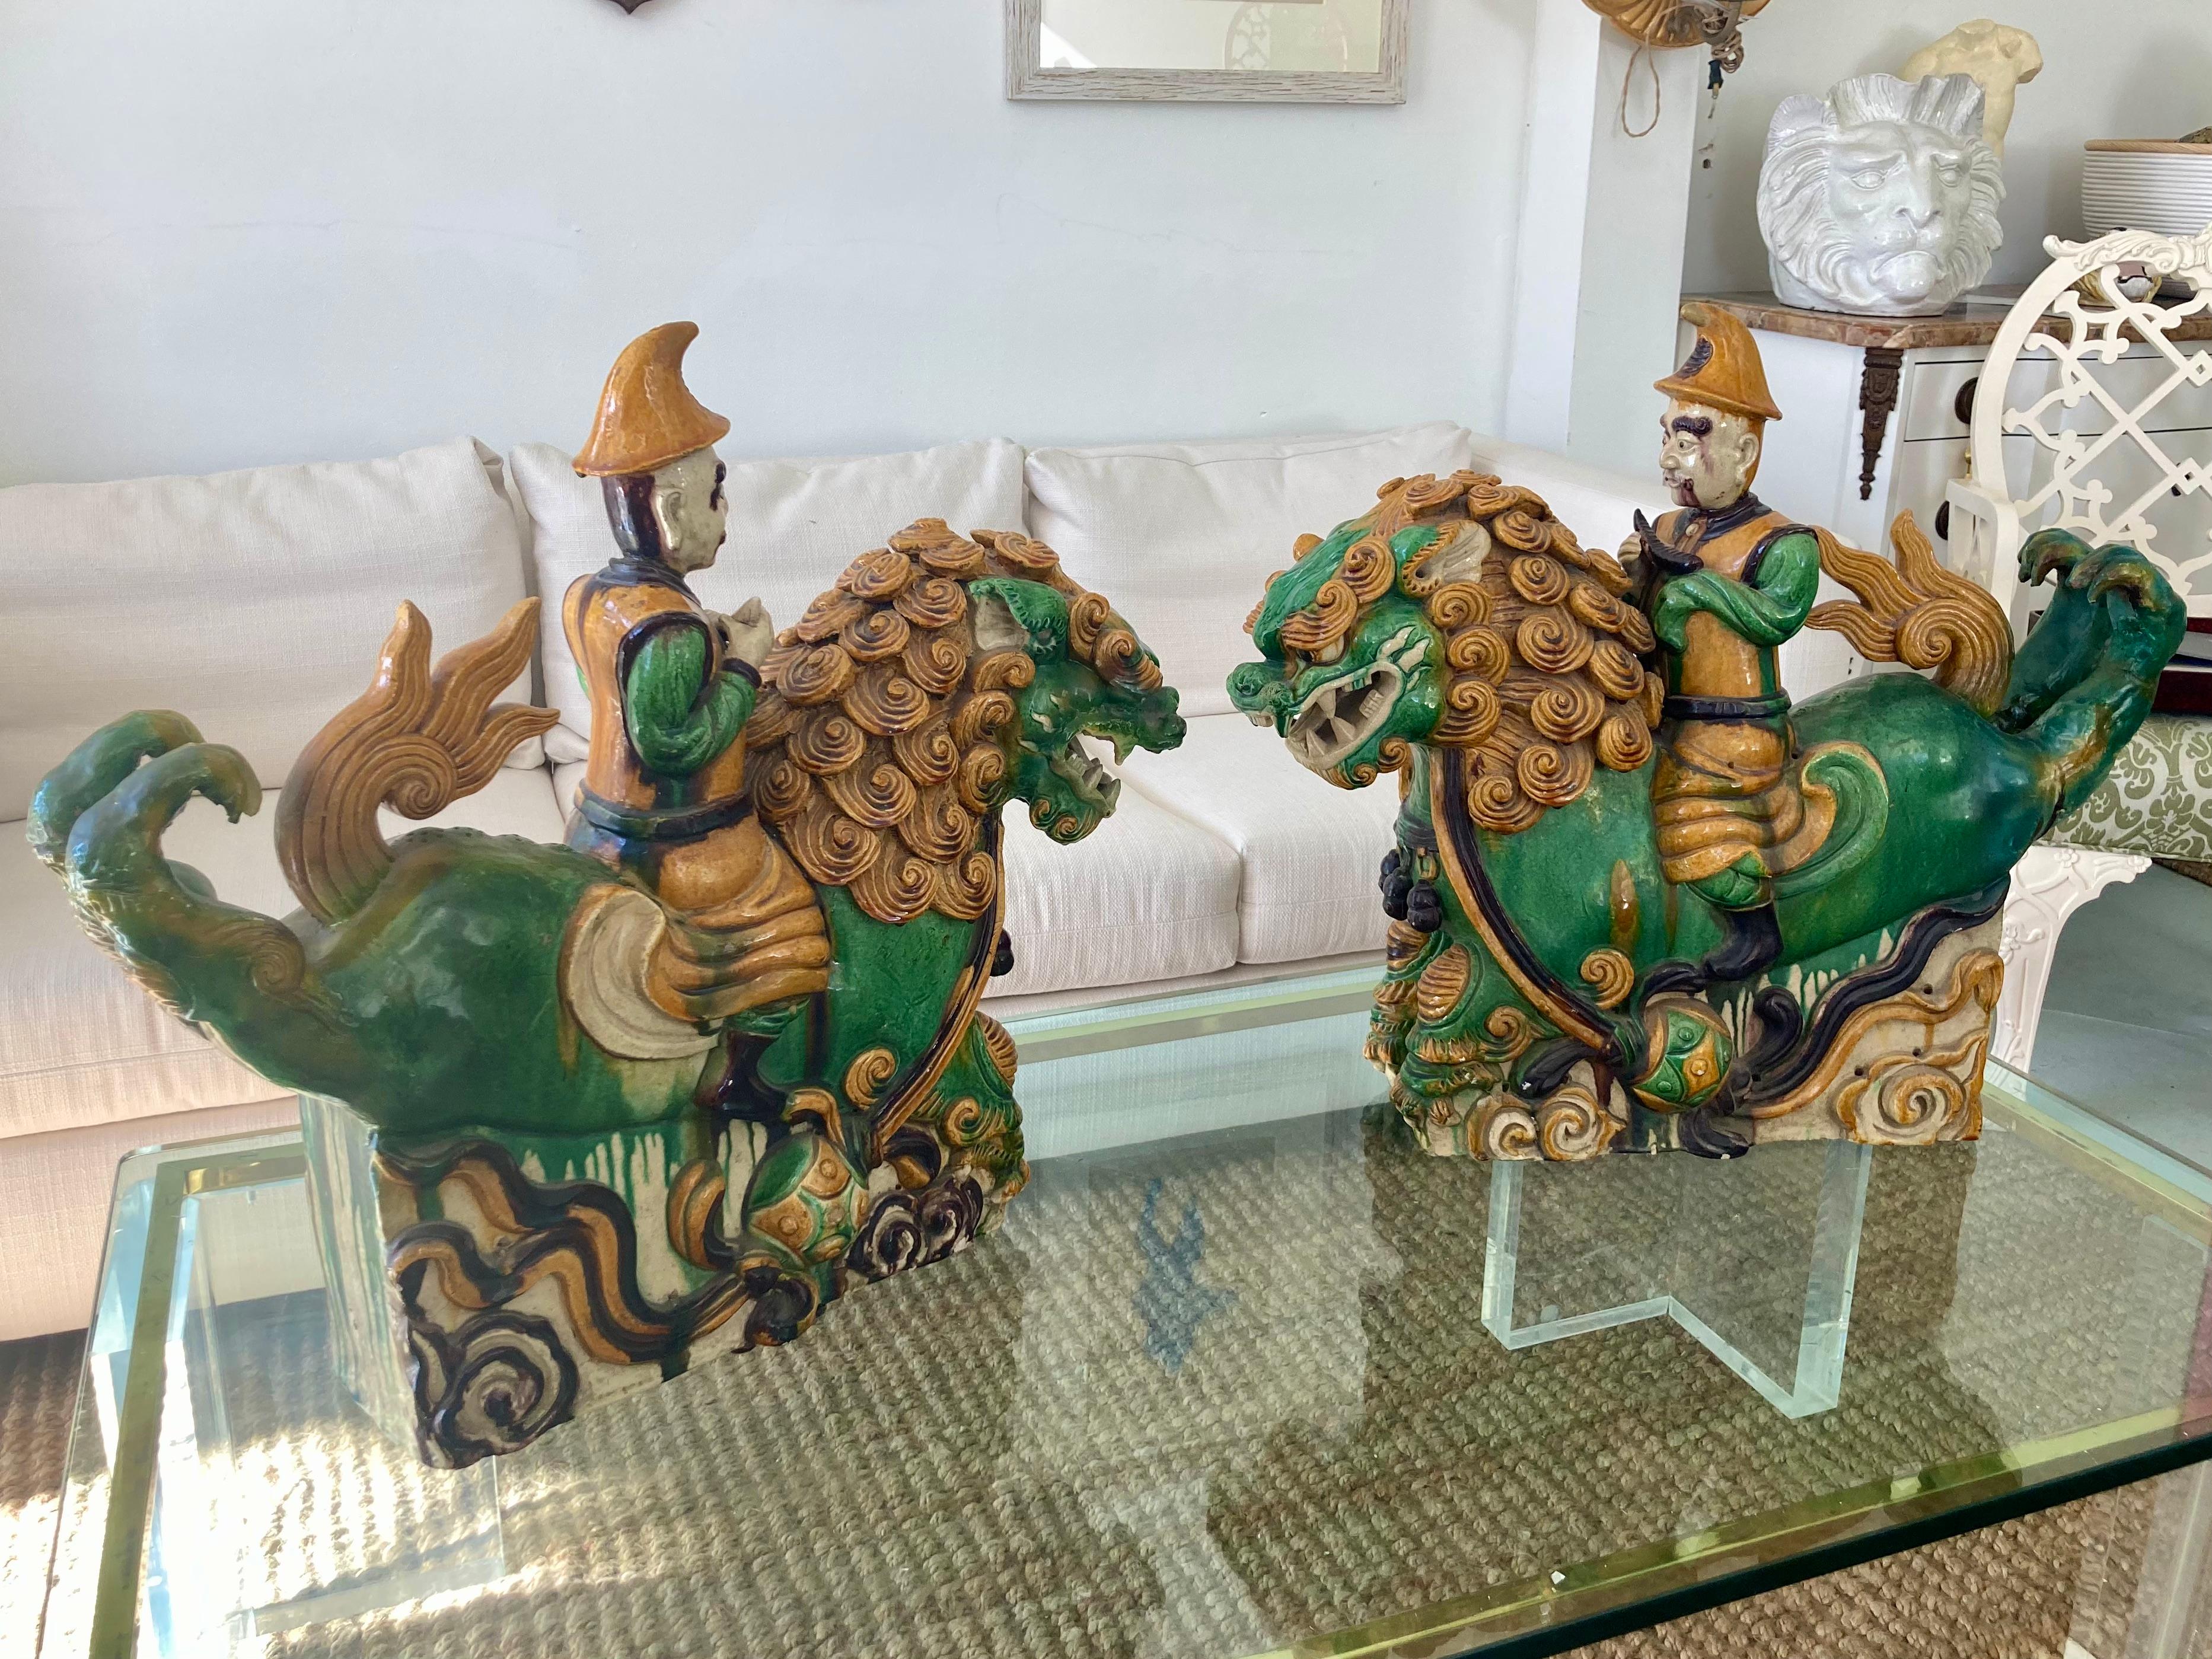 Beautiful pair of Chinese glazed terra cotta foo fogs roof tiles. Amazing sculpting details and colors.